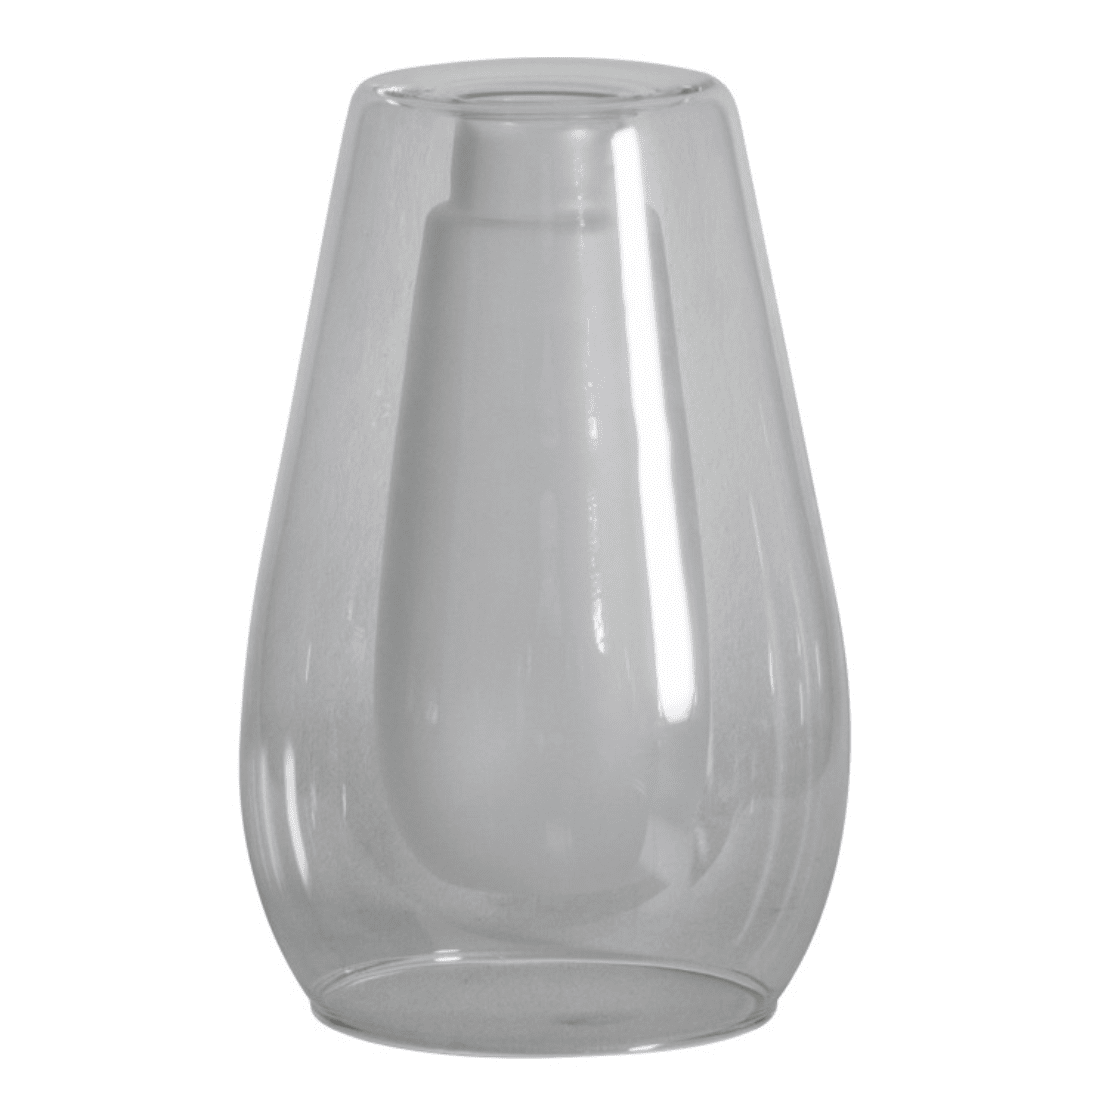 Suspended Tall White Vase - Outlet - Save 20%